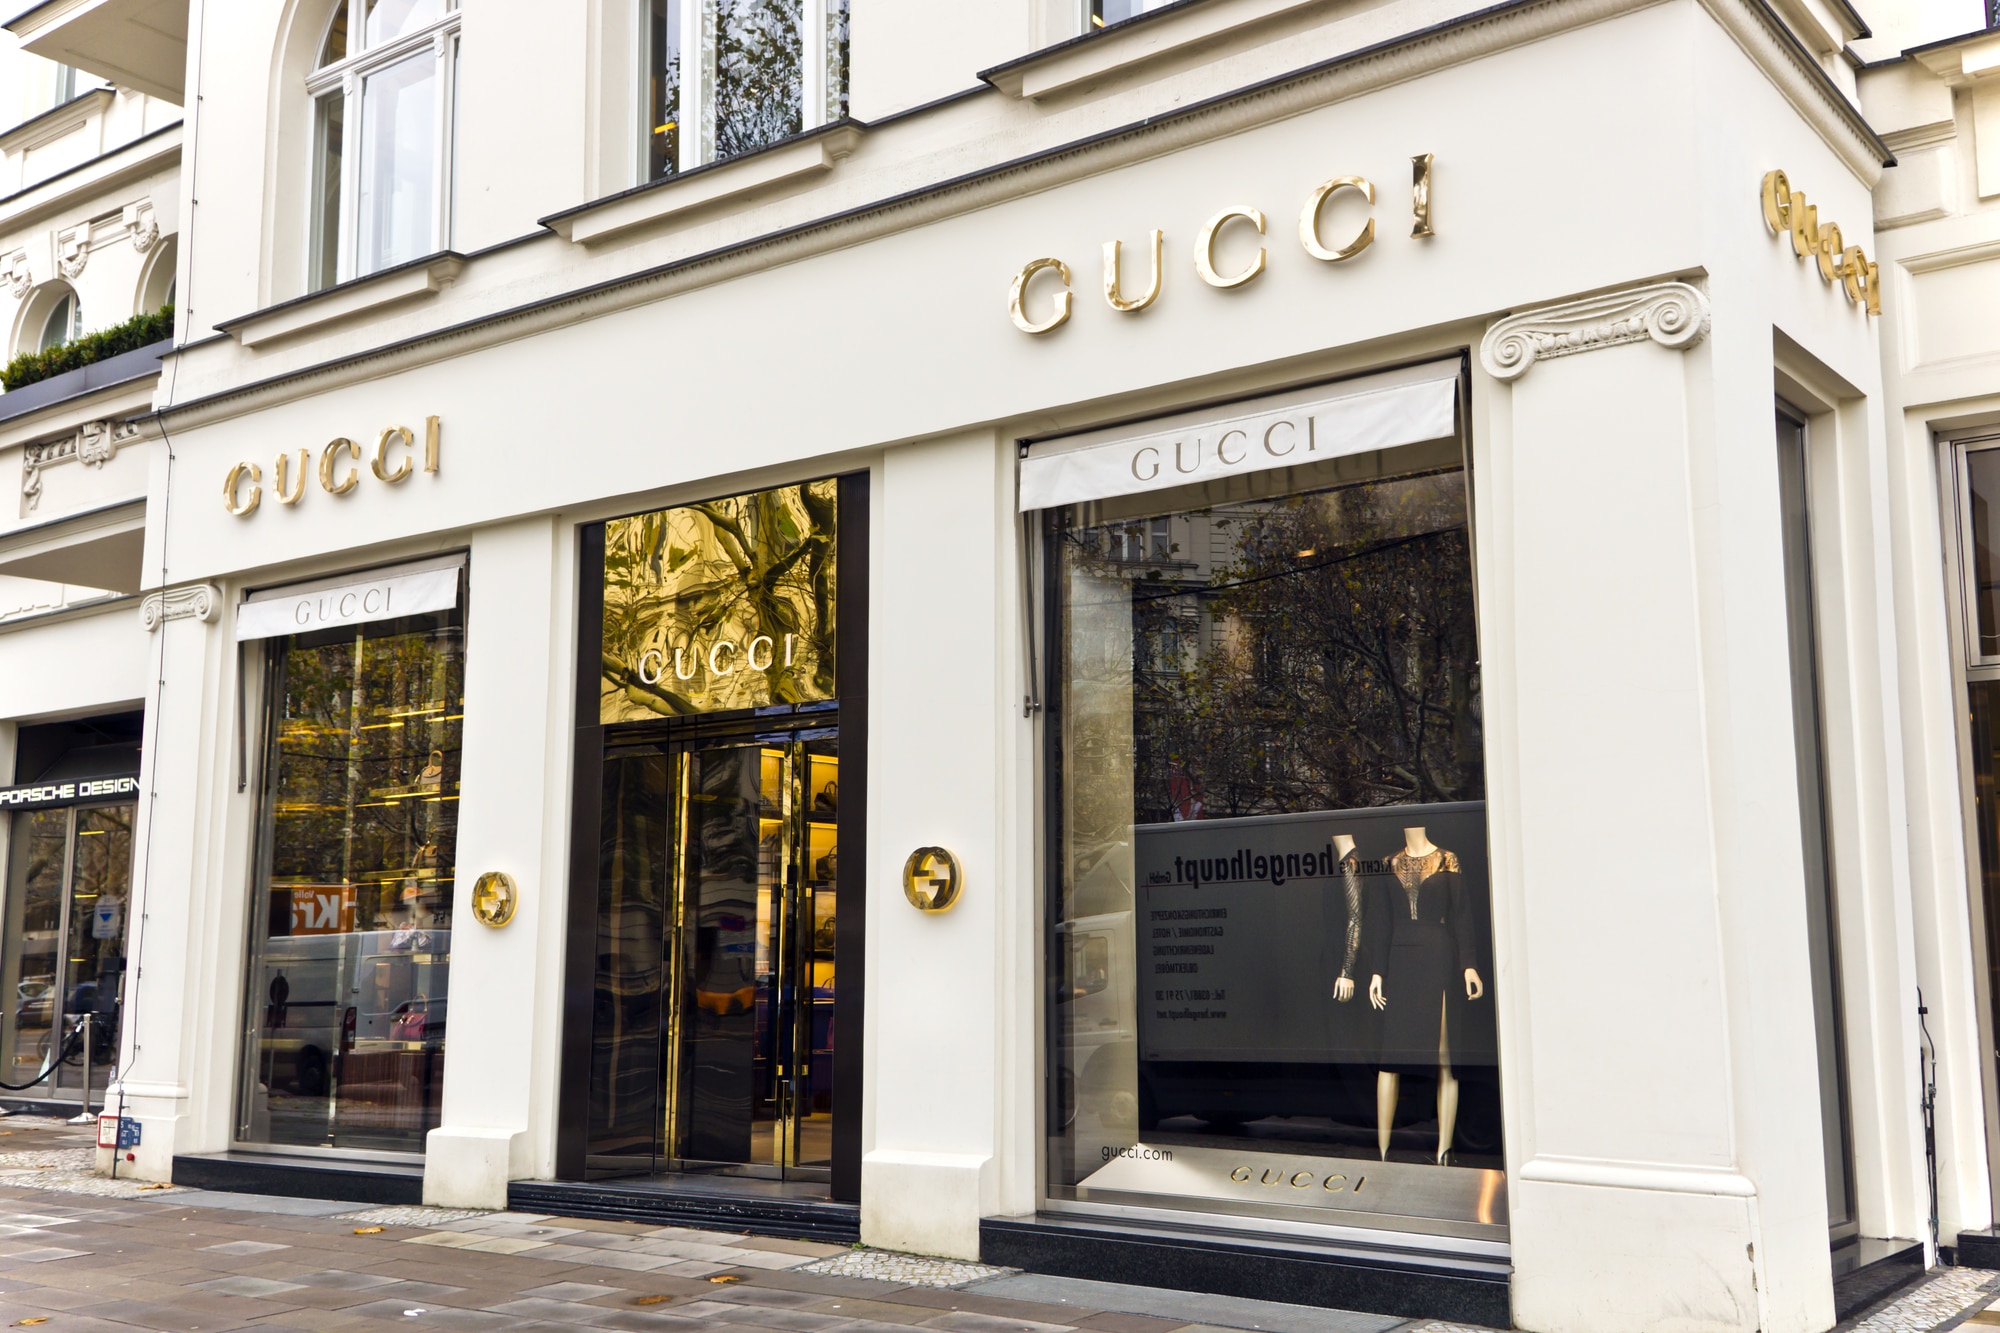 Gucci Outlet vs Gucci Retail - Quality and Design Differences 